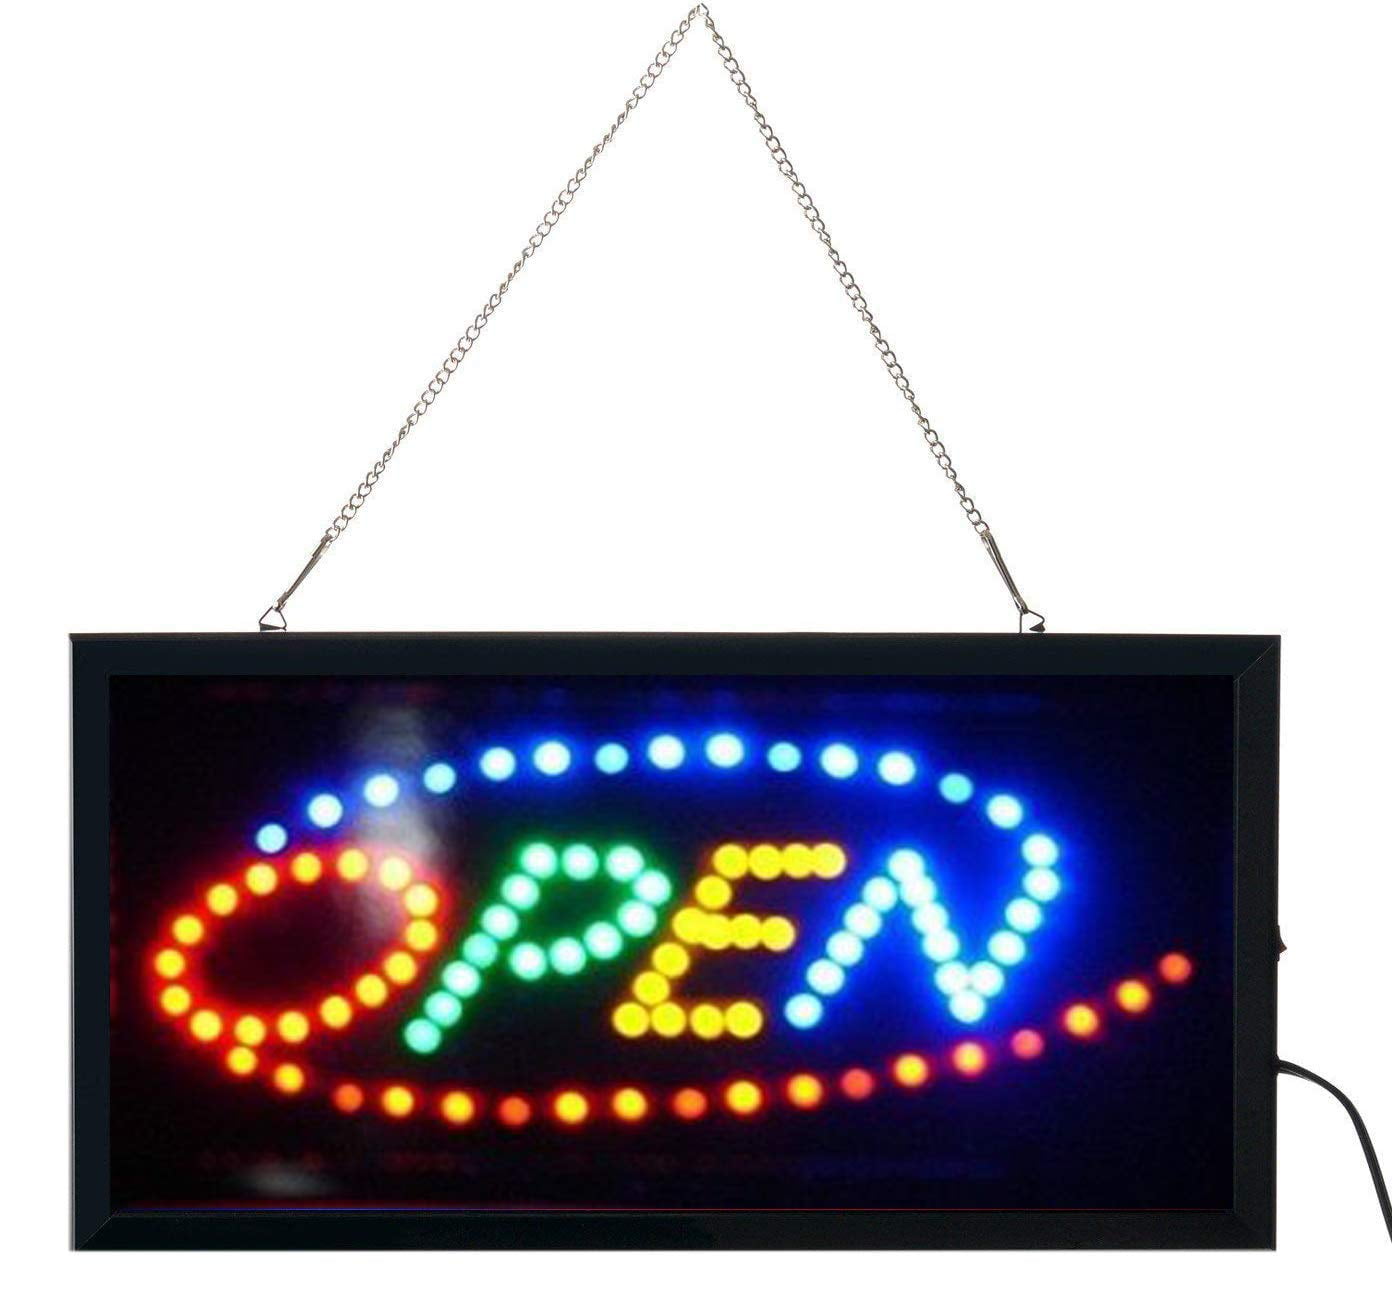 ANIMATED LED NEON LIGHT LIGHTED OPEN SIGN CHAIN 19"X10" US SELLER H LED01 